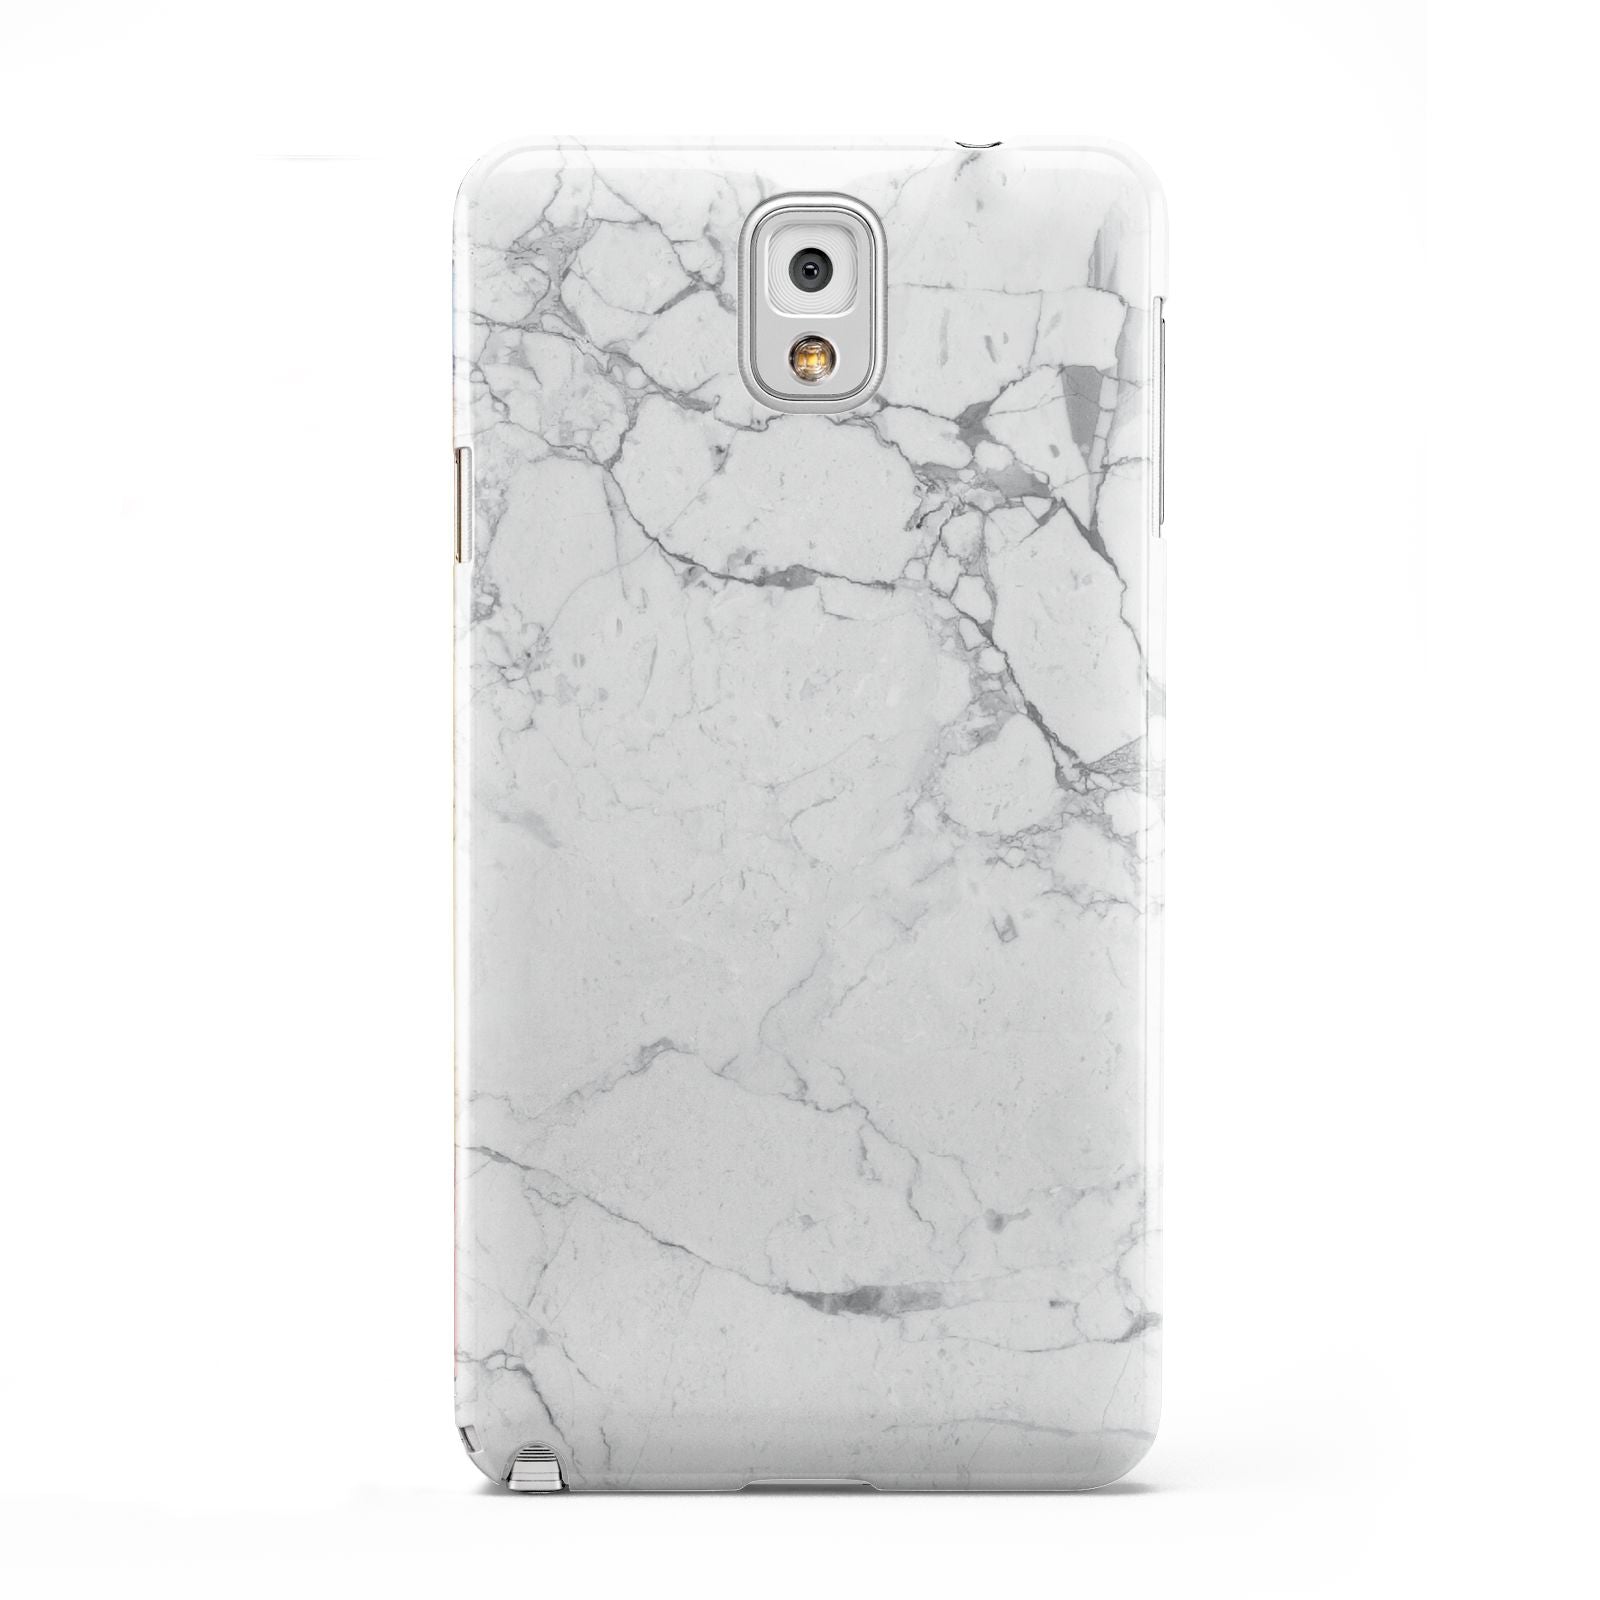 Faux Marble Effect Grey White Samsung Galaxy Note 3 Case